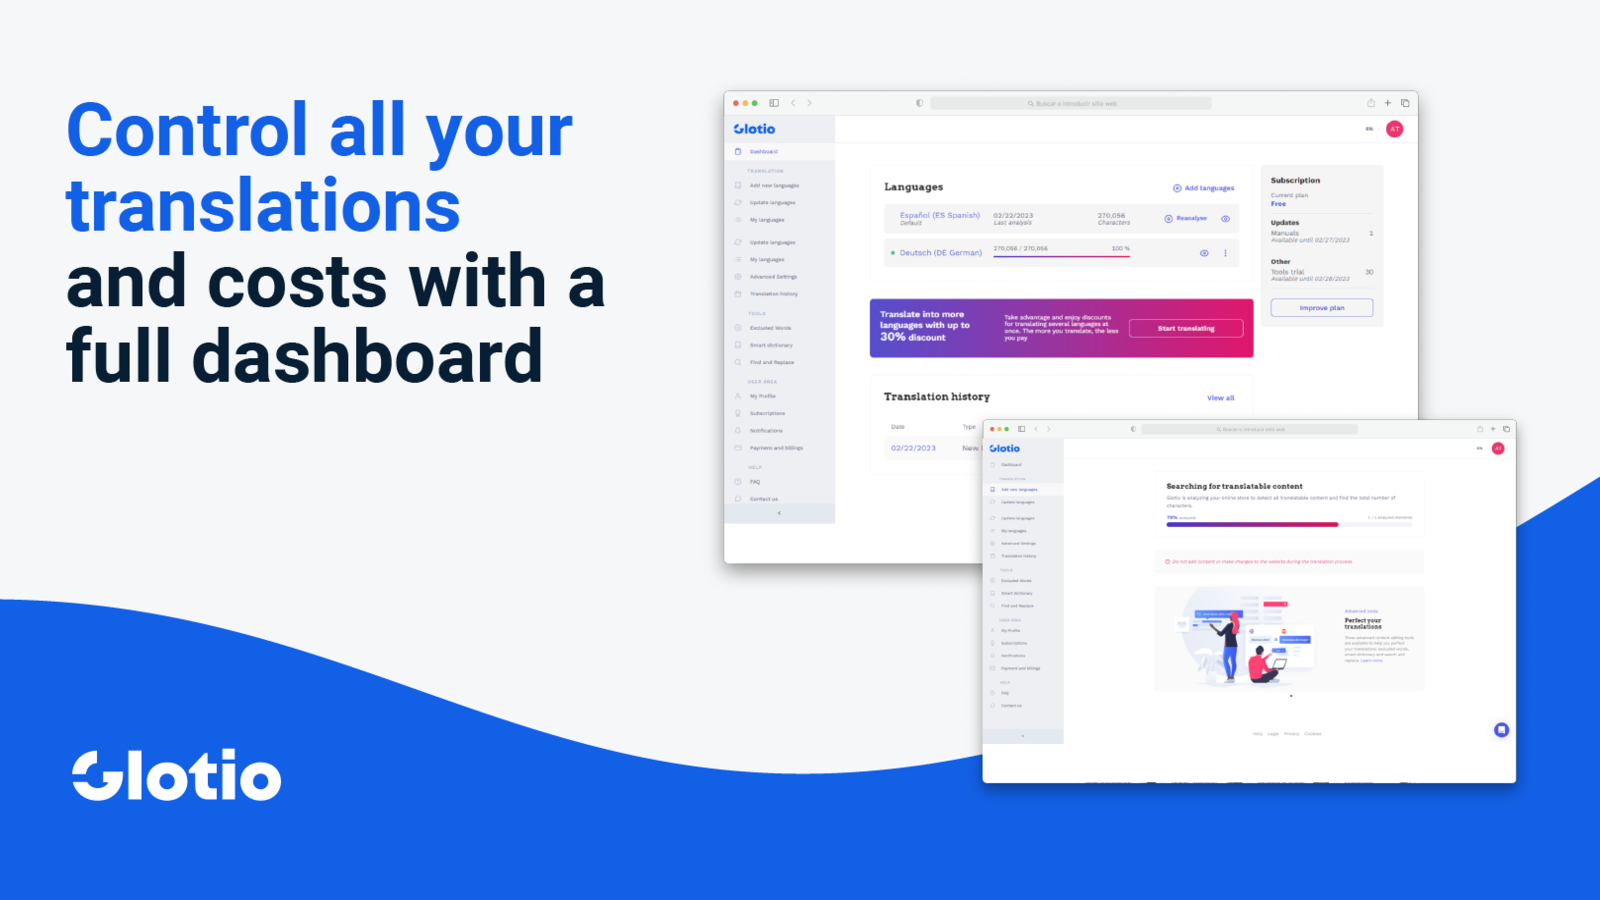 Control all your translations and costs with a full dashboard